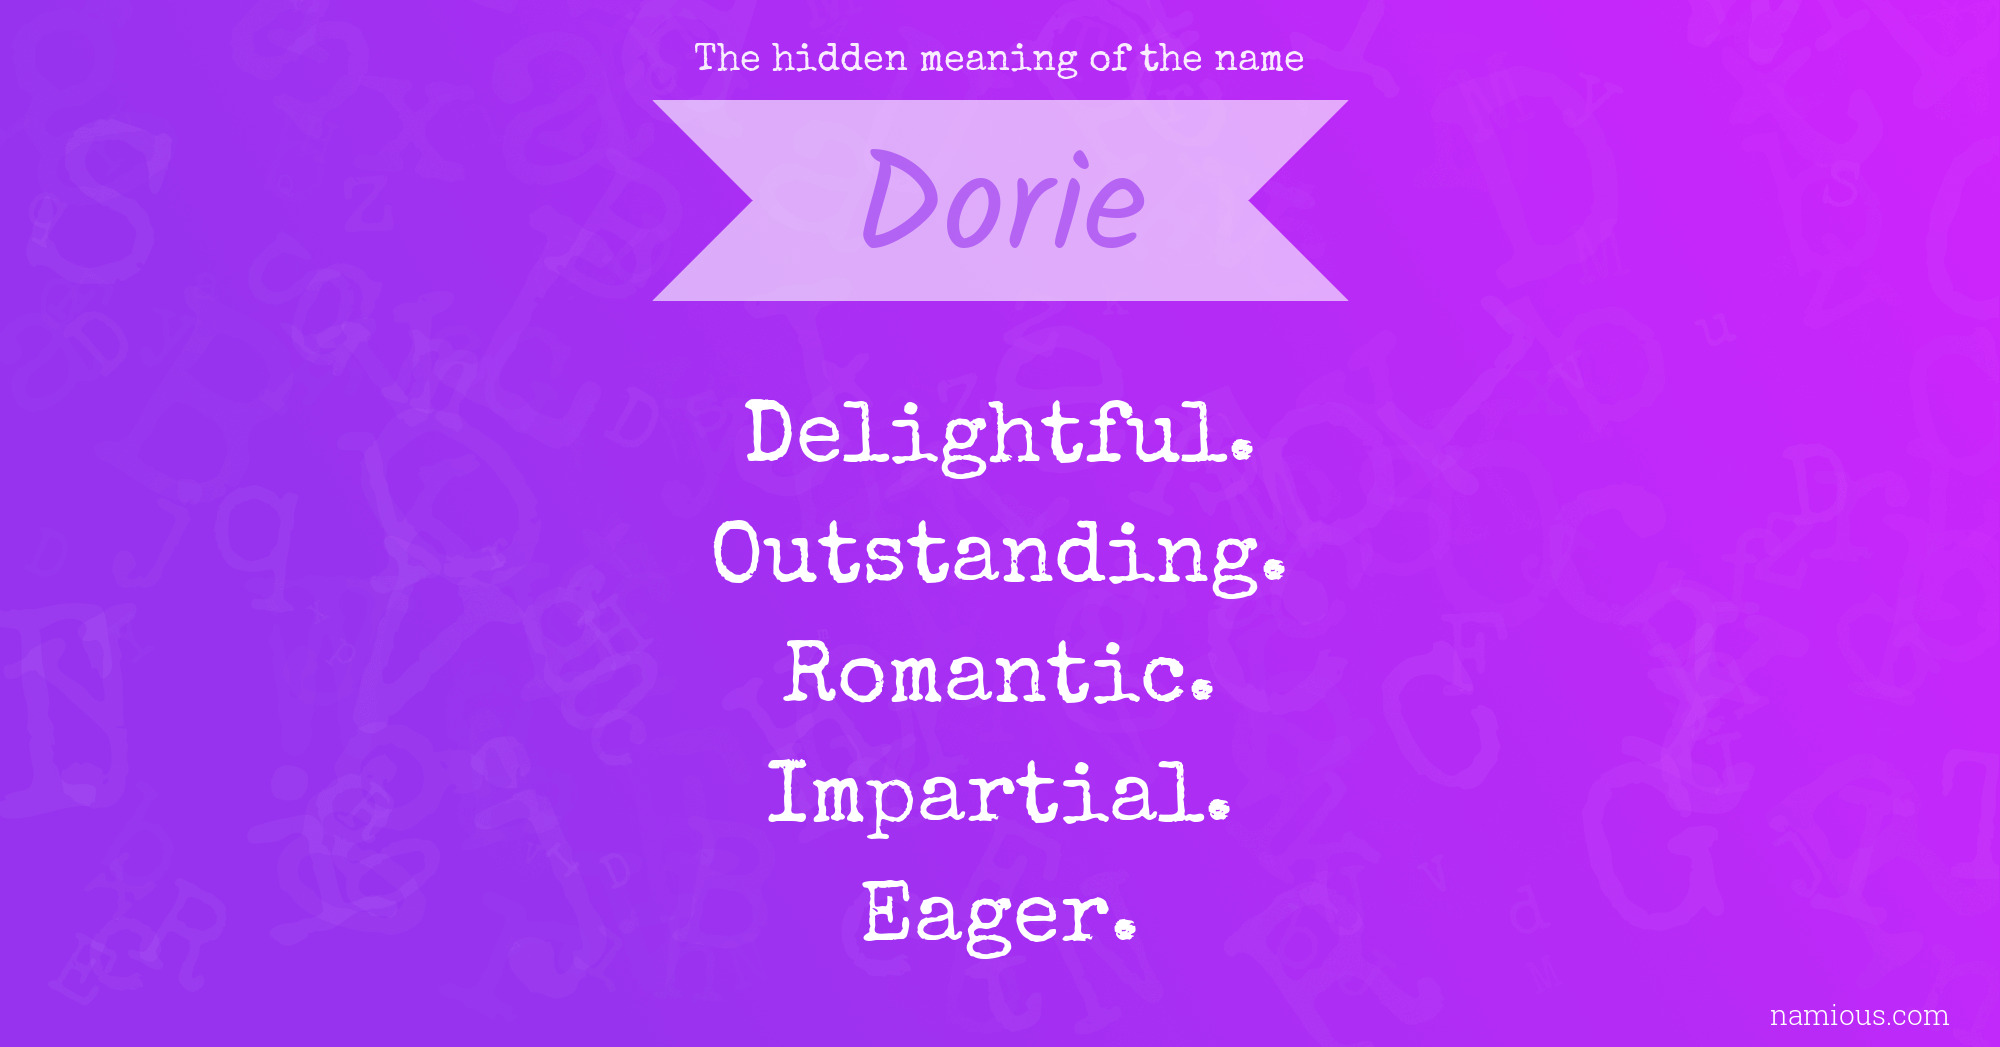 The hidden meaning of the name Dorie